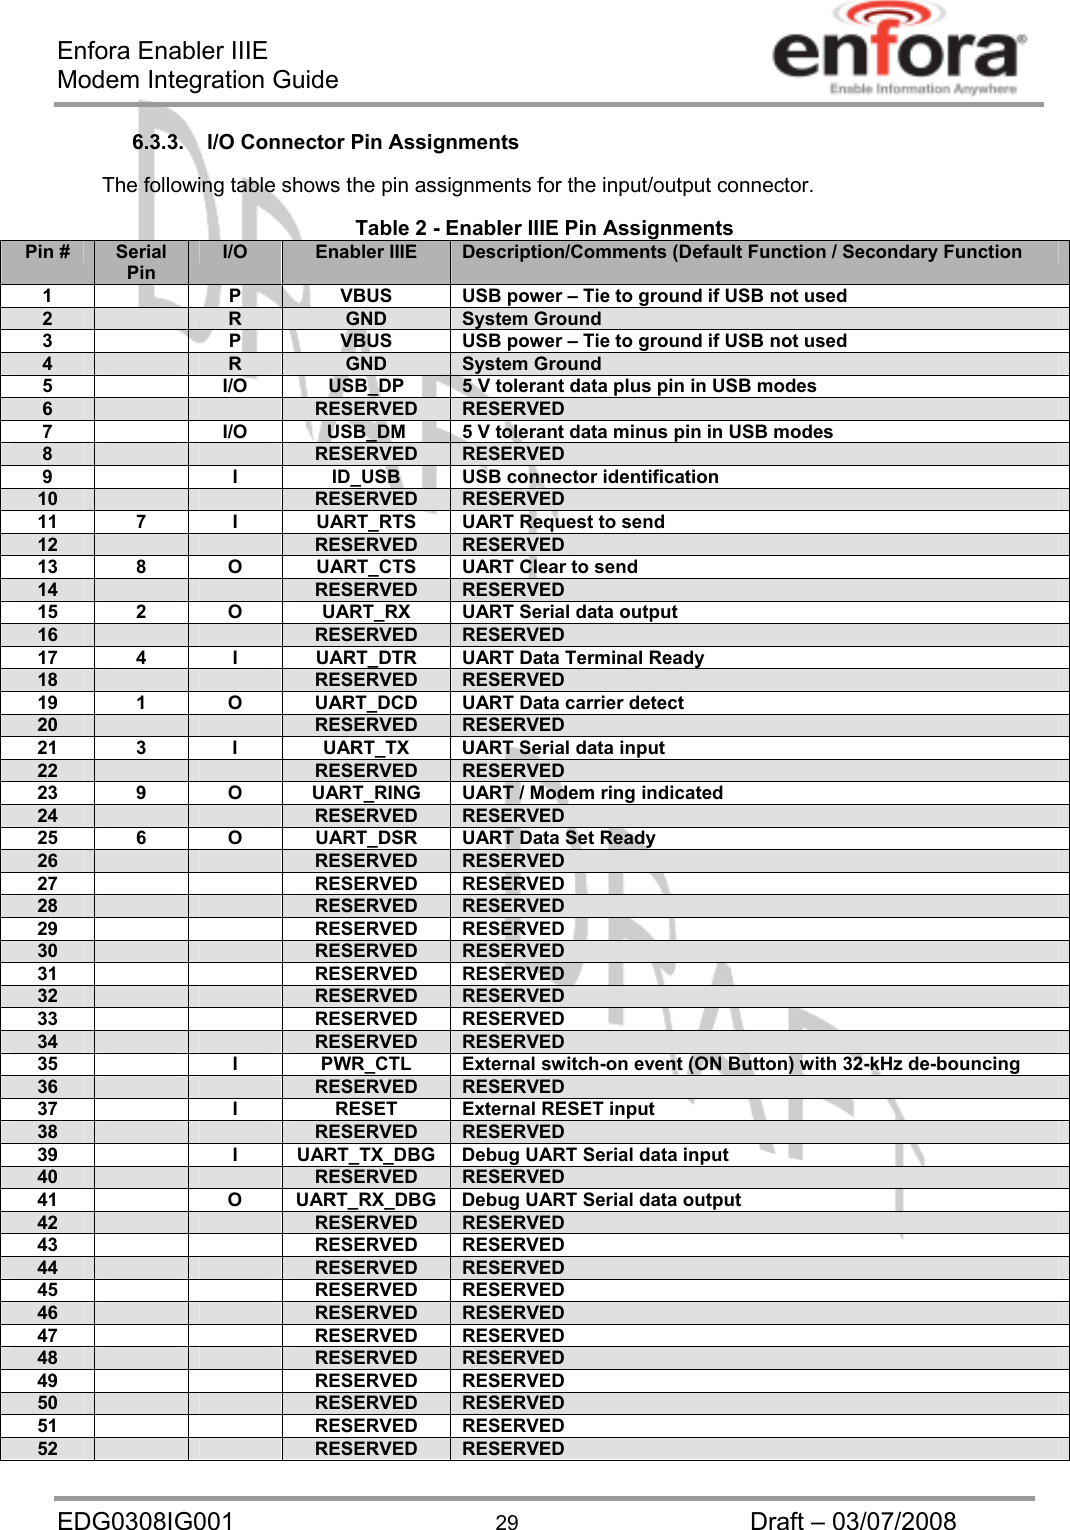 Enfora Enabler IIIE Modem Integration Guide EDG0308IG001  29  Draft – 03/07/2008 6.3.3.  I/O Connector Pin Assignments  The following table shows the pin assignments for the input/output connector.    Table 2 - Enabler IIIE Pin Assignments Pin #  Serial Pin I/O  Enabler IIIE  Description/Comments (Default Function / Secondary Function 1    P  VBUS  USB power – Tie to ground if USB not used 2   R  GND  System Ground 3    P  VBUS  USB power – Tie to ground if USB not used 4   R  GND  System Ground 5    I/O  USB_DP  5 V tolerant data plus pin in USB modes  6      RESERVED  RESERVED 7    I/O  USB_DM  5 V tolerant data minus pin in USB modes 8      RESERVED  RESERVED 9    I  ID_USB  USB connector identification 10      RESERVED  RESERVED 11  7  I  UART_RTS  UART Request to send 12      RESERVED  RESERVED 13  8  O  UART_CTS  UART Clear to send 14      RESERVED  RESERVED 15  2  O  UART_RX  UART Serial data output 16      RESERVED  RESERVED 17  4  I  UART_DTR  UART Data Terminal Ready 18      RESERVED  RESERVED 19  1  O  UART_DCD  UART Data carrier detect 20      RESERVED  RESERVED 21  3  I  UART_TX  UART Serial data input 22      RESERVED  RESERVED 23  9  O  UART_RING  UART / Modem ring indicated 24      RESERVED  RESERVED 25  6  O  UART_DSR  UART Data Set Ready 26      RESERVED  RESERVED 27    RESERVED RESERVED 28      RESERVED  RESERVED 29    RESERVED RESERVED 30      RESERVED  RESERVED 31    RESERVED RESERVED 32      RESERVED  RESERVED 33    RESERVED RESERVED 34      RESERVED  RESERVED 35    I  PWR_CTL  External switch-on event (ON Button) with 32-kHz de-bouncing 36      RESERVED  RESERVED 37    I  RESET  External RESET input 38      RESERVED  RESERVED 39    I  UART_TX_DBG  Debug UART Serial data input 40      RESERVED  RESERVED 41    O  UART_RX_DBG  Debug UART Serial data output 42      RESERVED  RESERVED 43    RESERVED RESERVED 44      RESERVED  RESERVED 45    RESERVED RESERVED 46      RESERVED  RESERVED 47    RESERVED RESERVED 48      RESERVED  RESERVED 49    RESERVED RESERVED 50      RESERVED  RESERVED 51    RESERVED RESERVED 52      RESERVED  RESERVED 